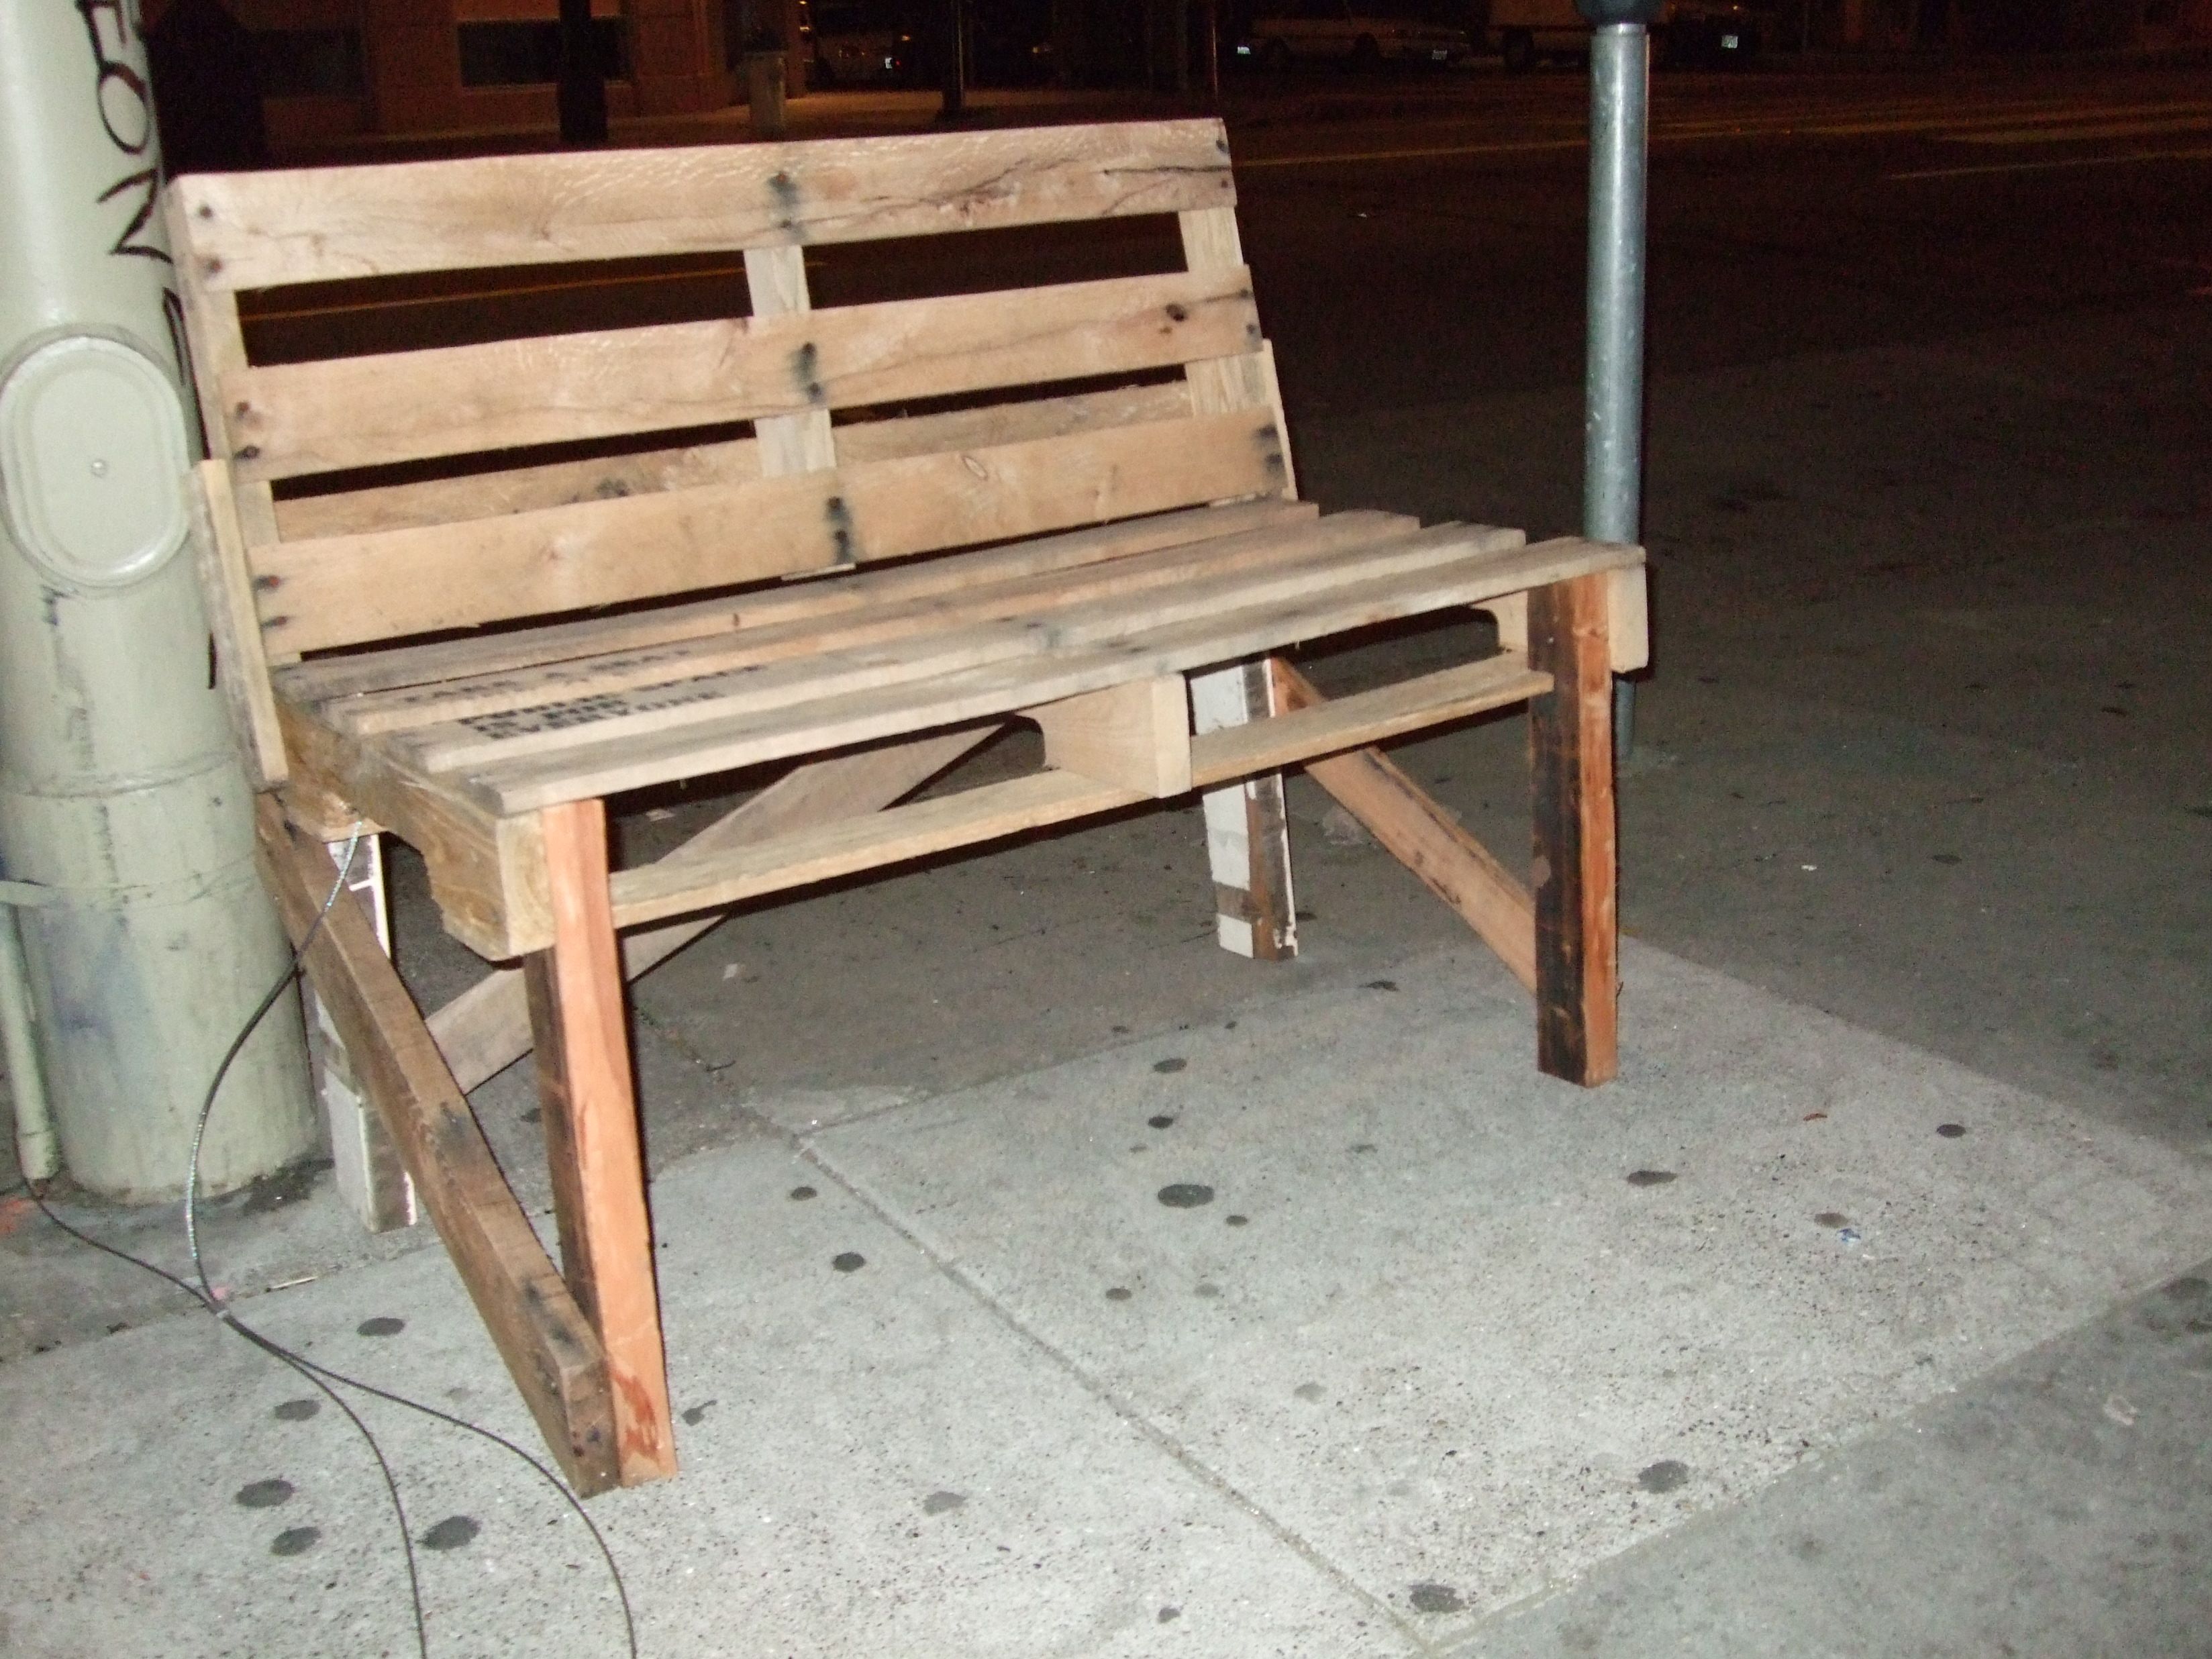 Activists respond to sit-lie with handmade benches